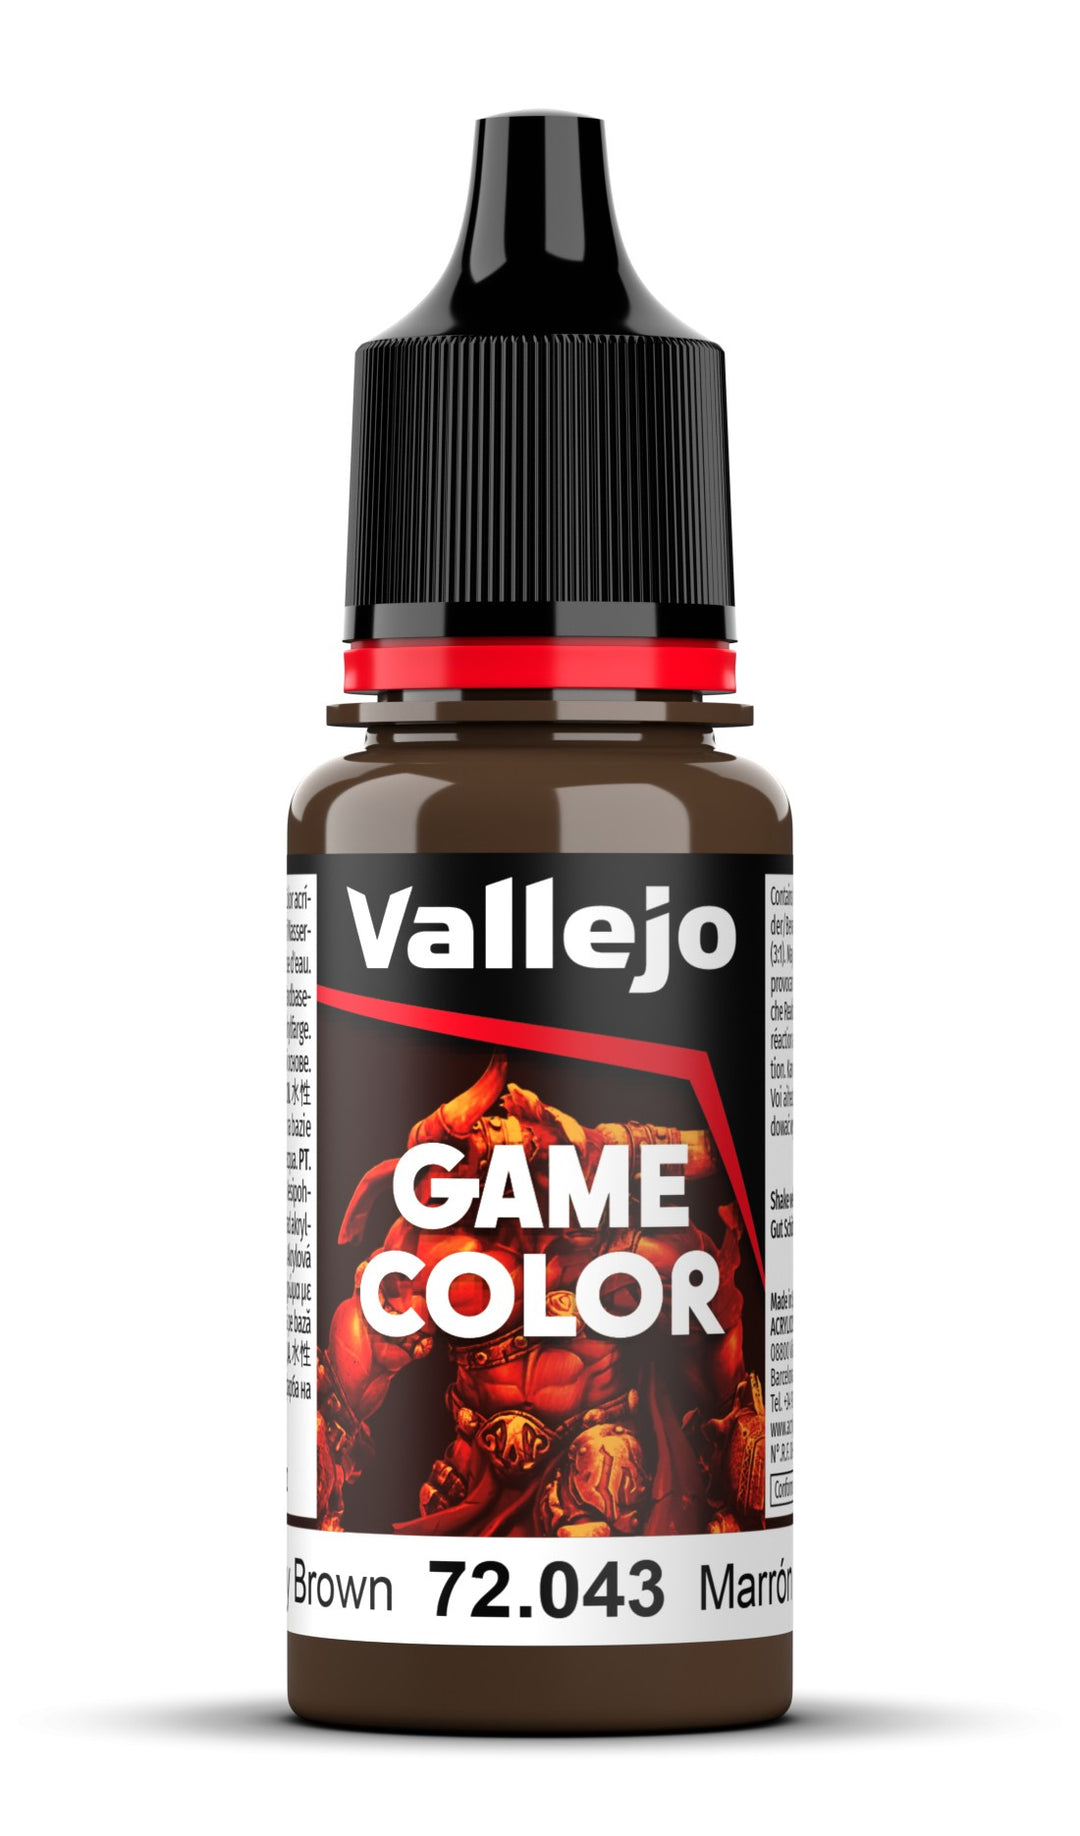 Vallejo Game Color - Beasty Brown 18 ml